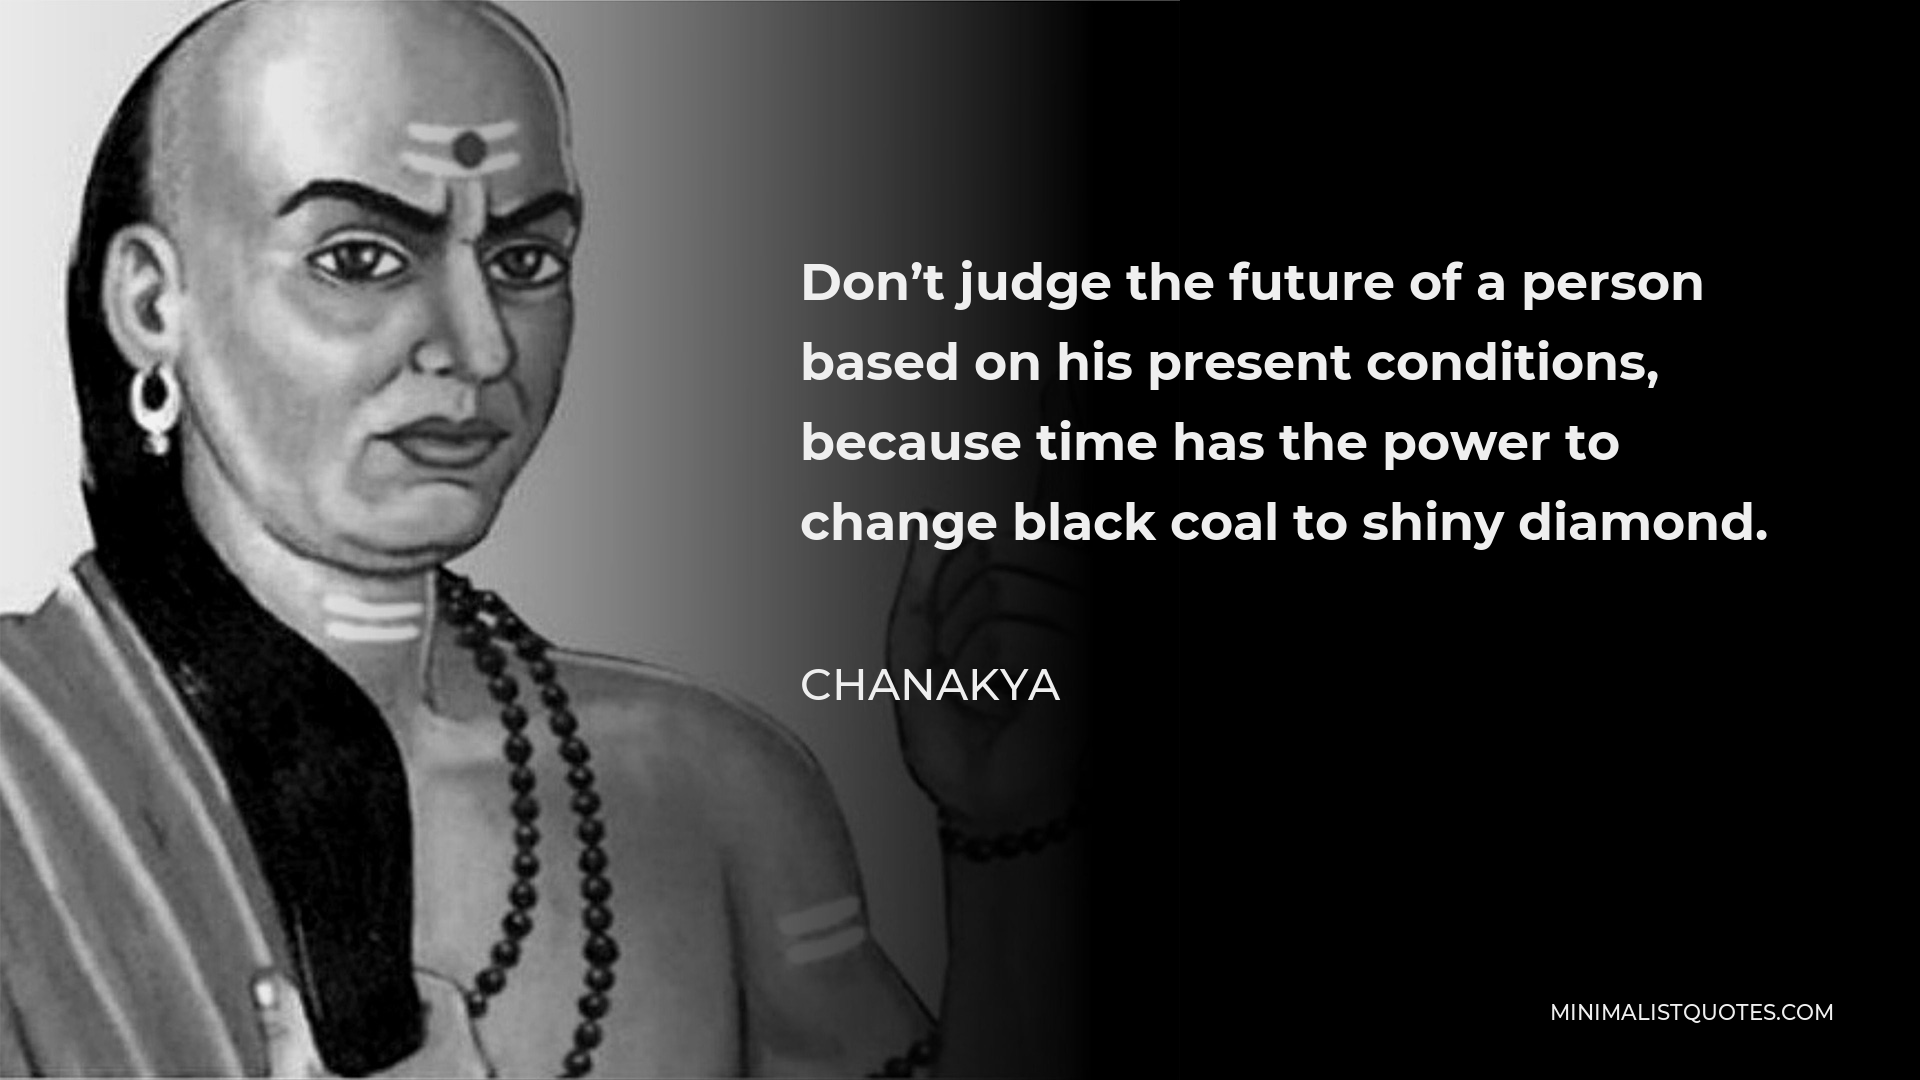 Chanakya Quote - Don’t judge the future of a person based on his present conditions, because time has the power to change black coal to shiny diamond.